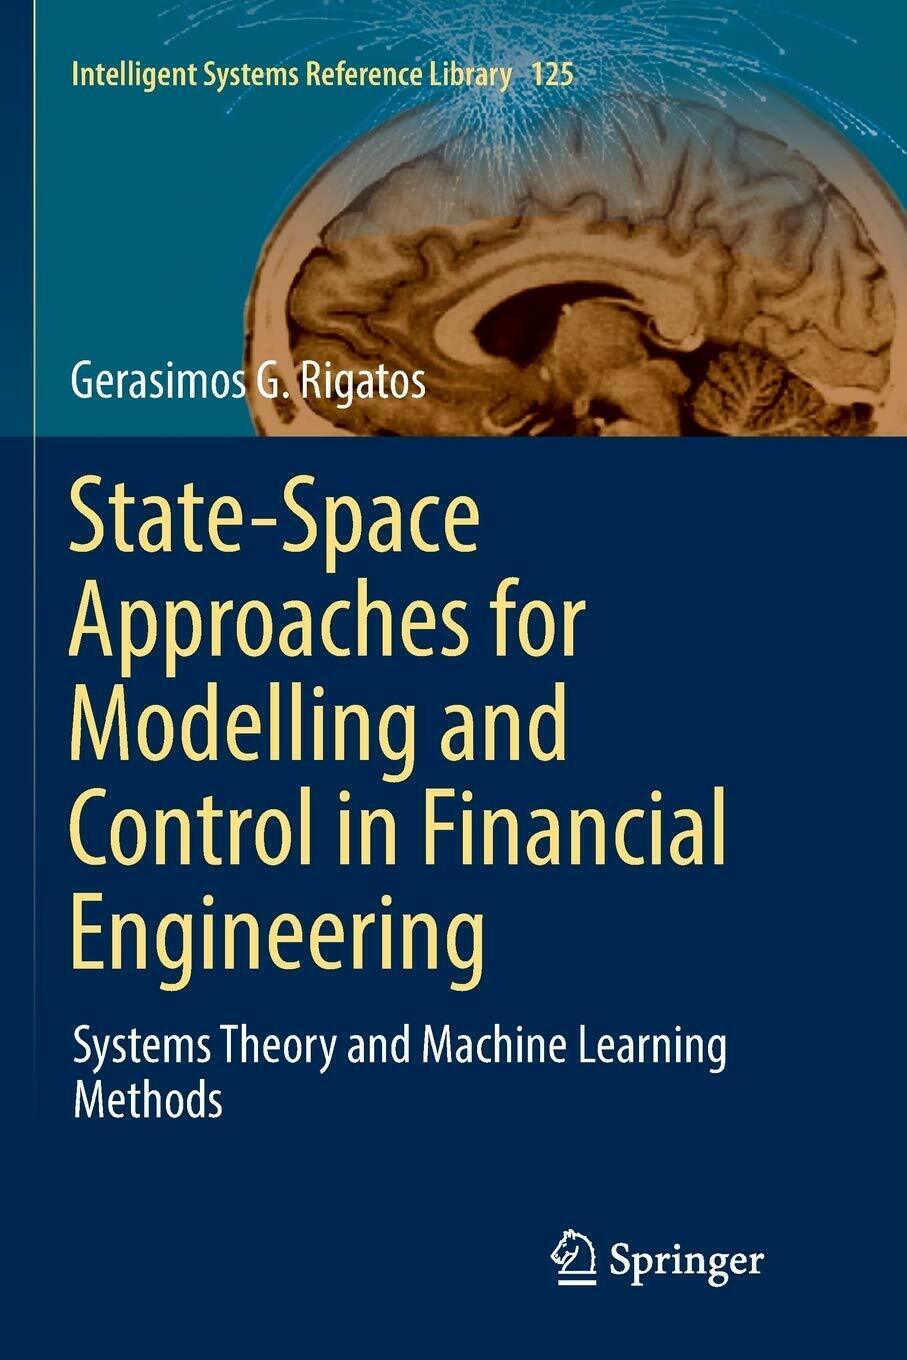 State-Space Approaches for Modelling and Control in Financial Engineering-2018